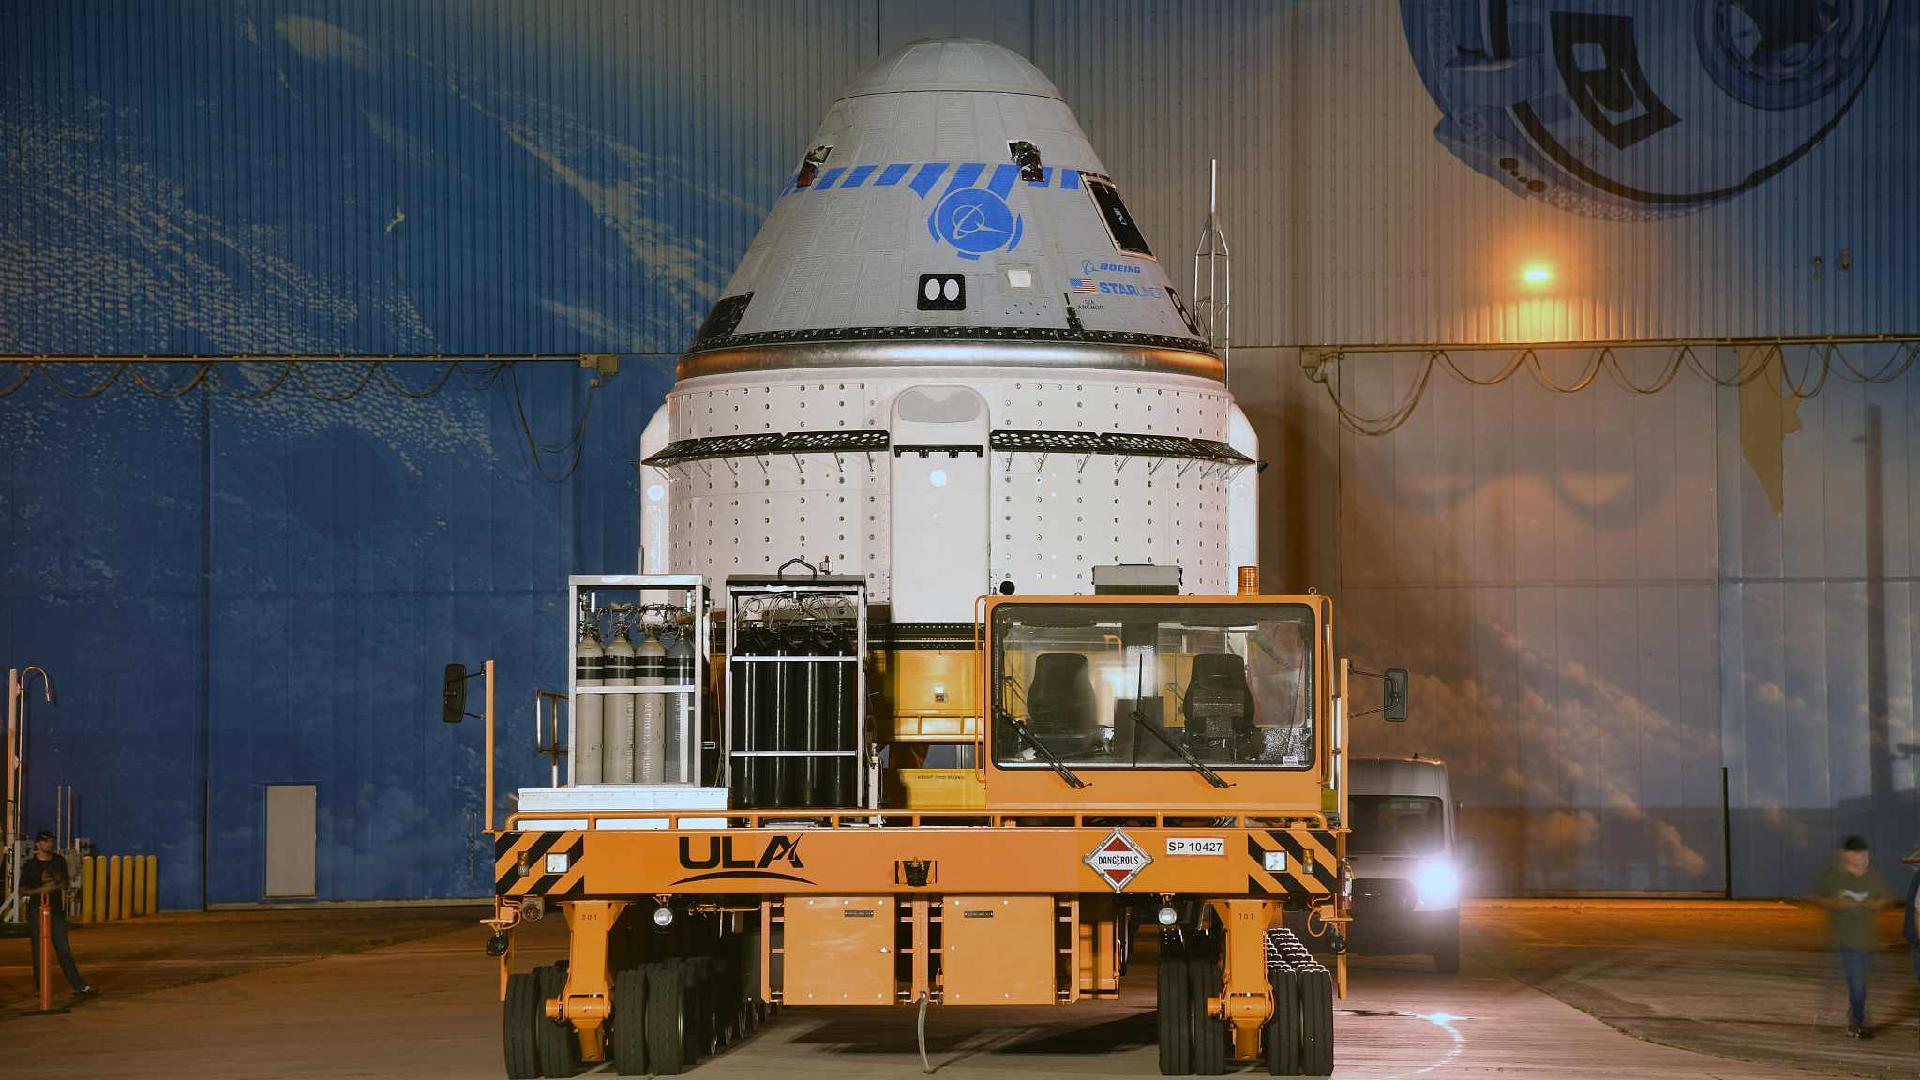 Boeing to remove Starliner from rocket, months-long delay expected - CGTN